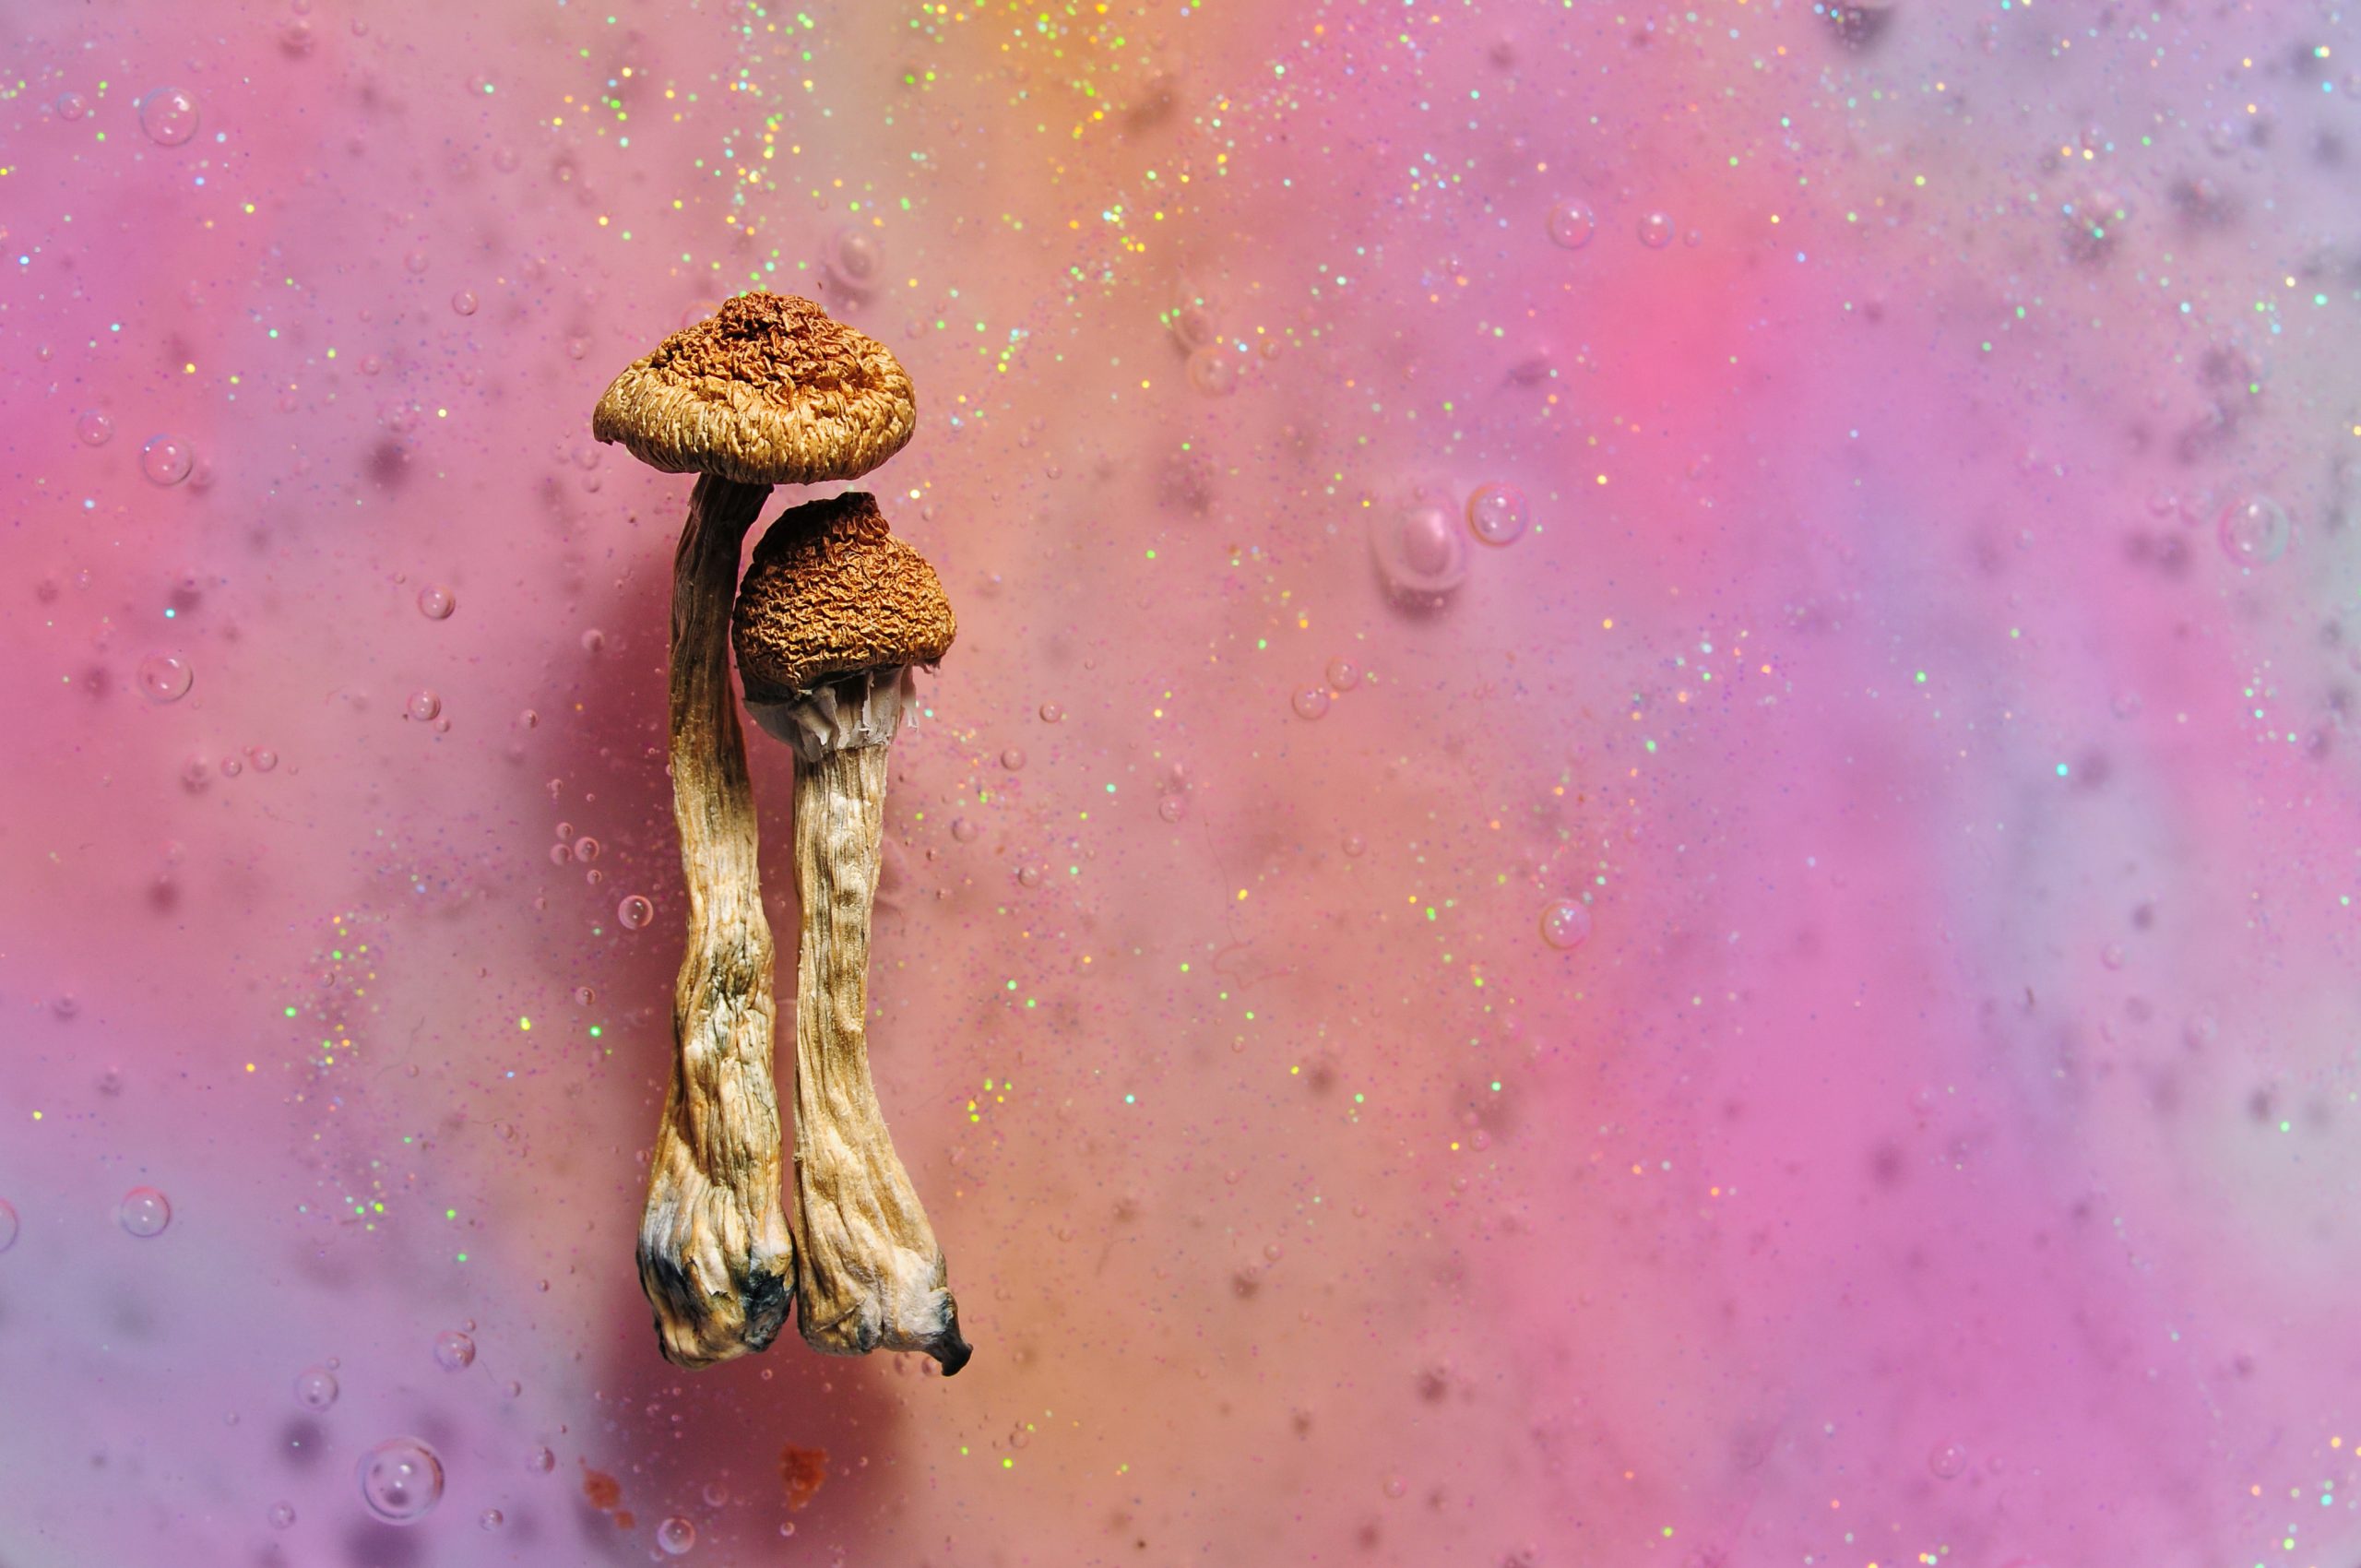 solo psychedelic two shrooms